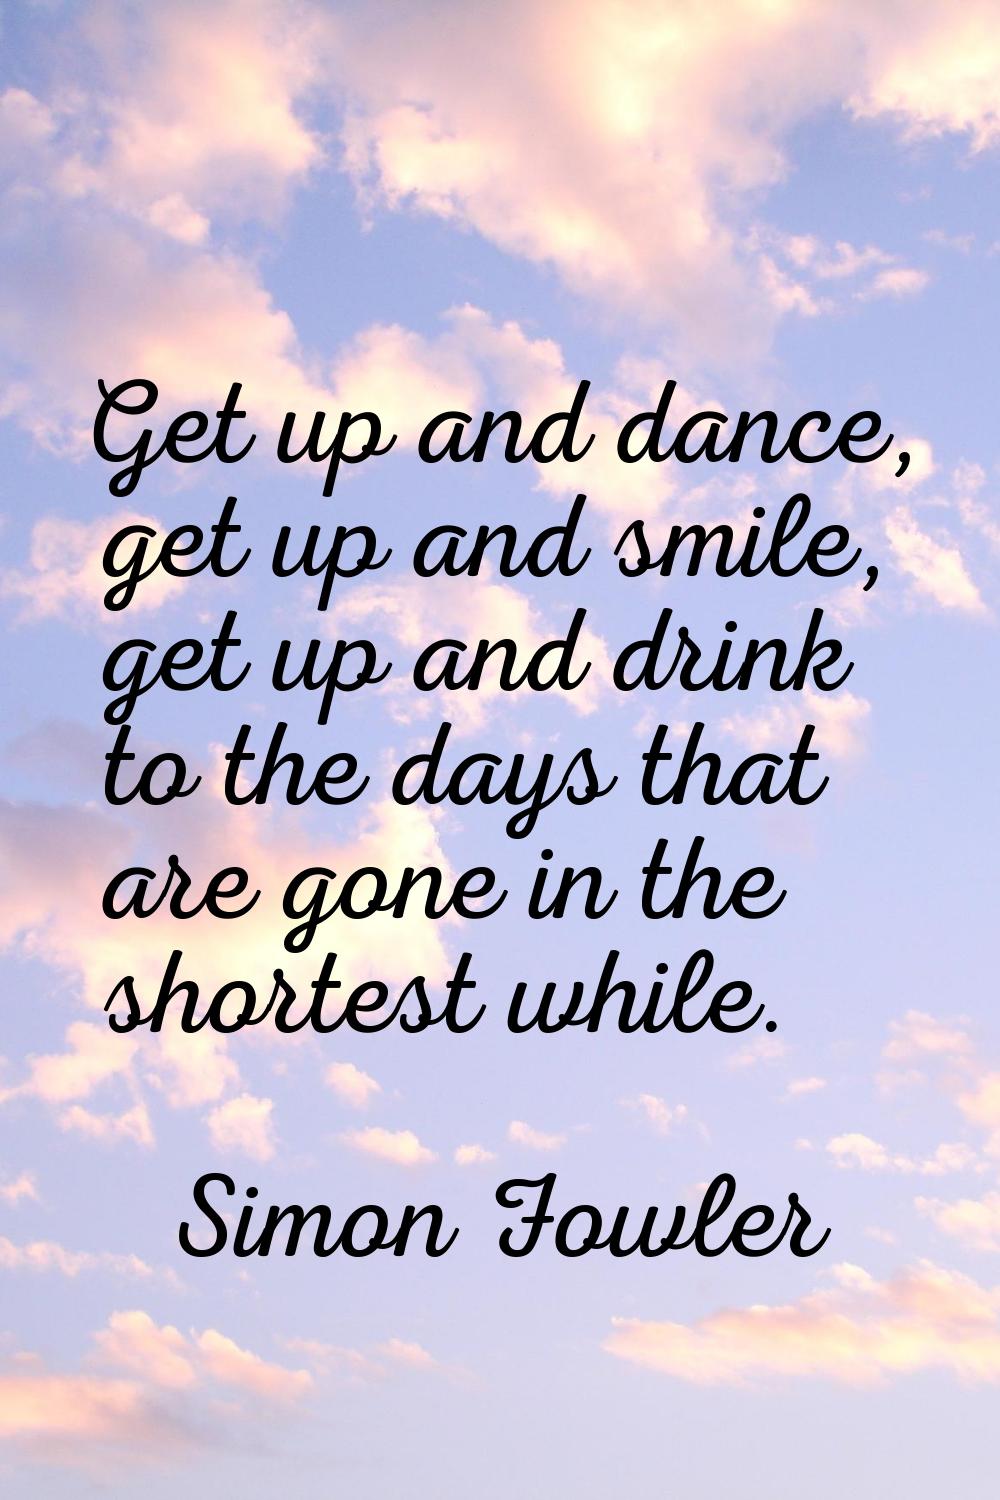 Get up and dance, get up and smile, get up and drink to the days that are gone in the shortest whil